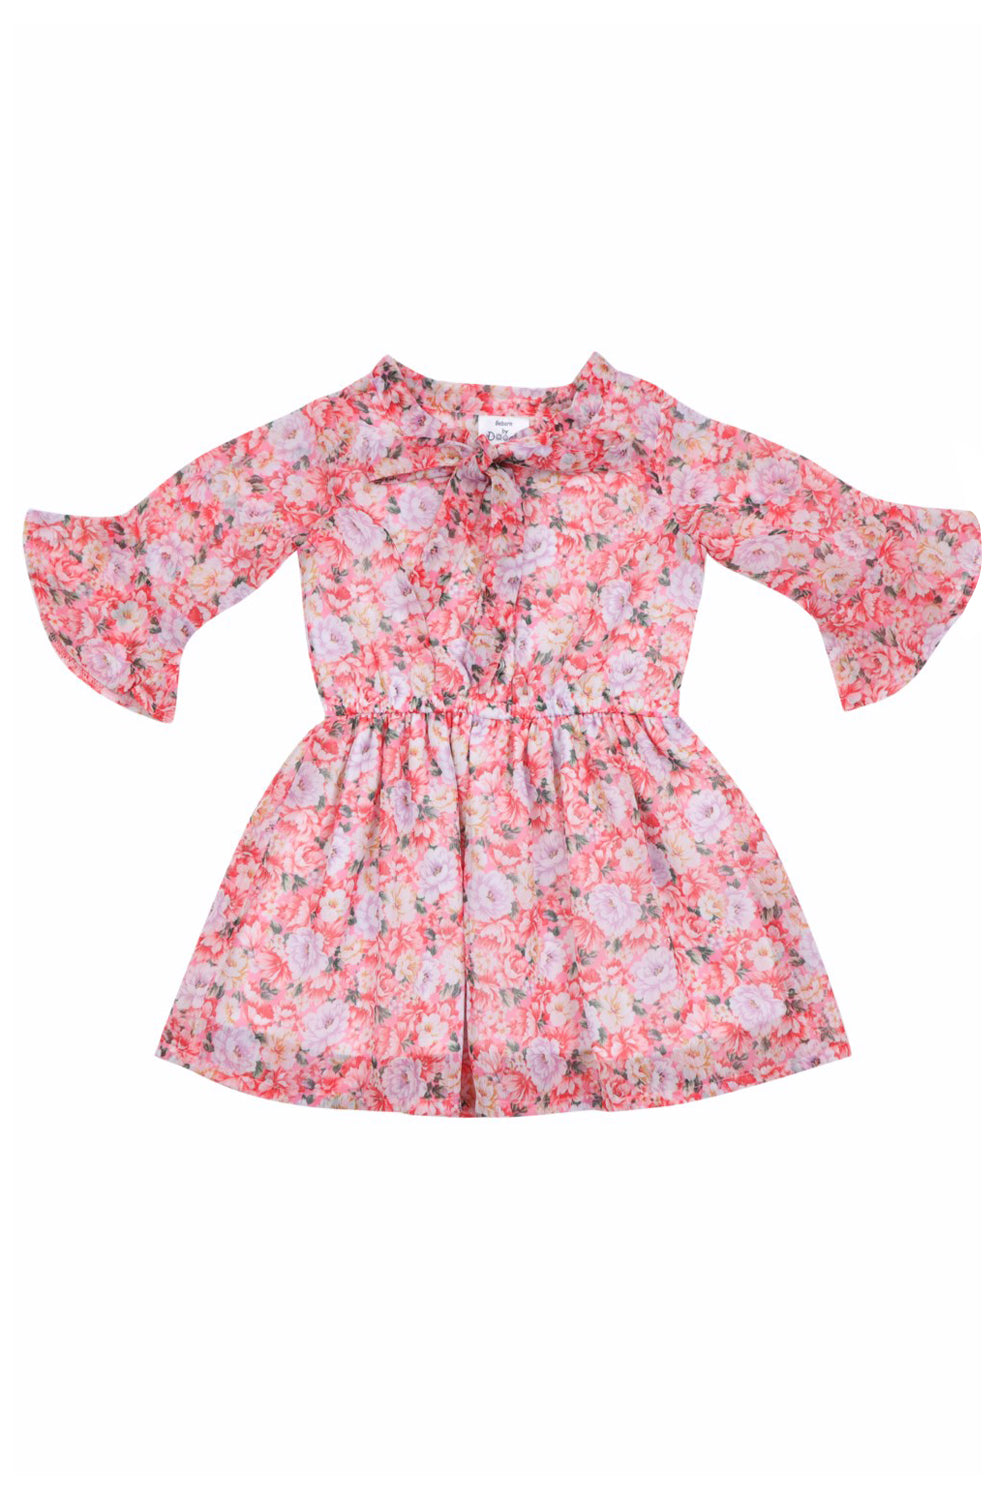 Doodle Girls Pink Chiffon Floral  Printed Tieup Dress With 3/4 Sleeve